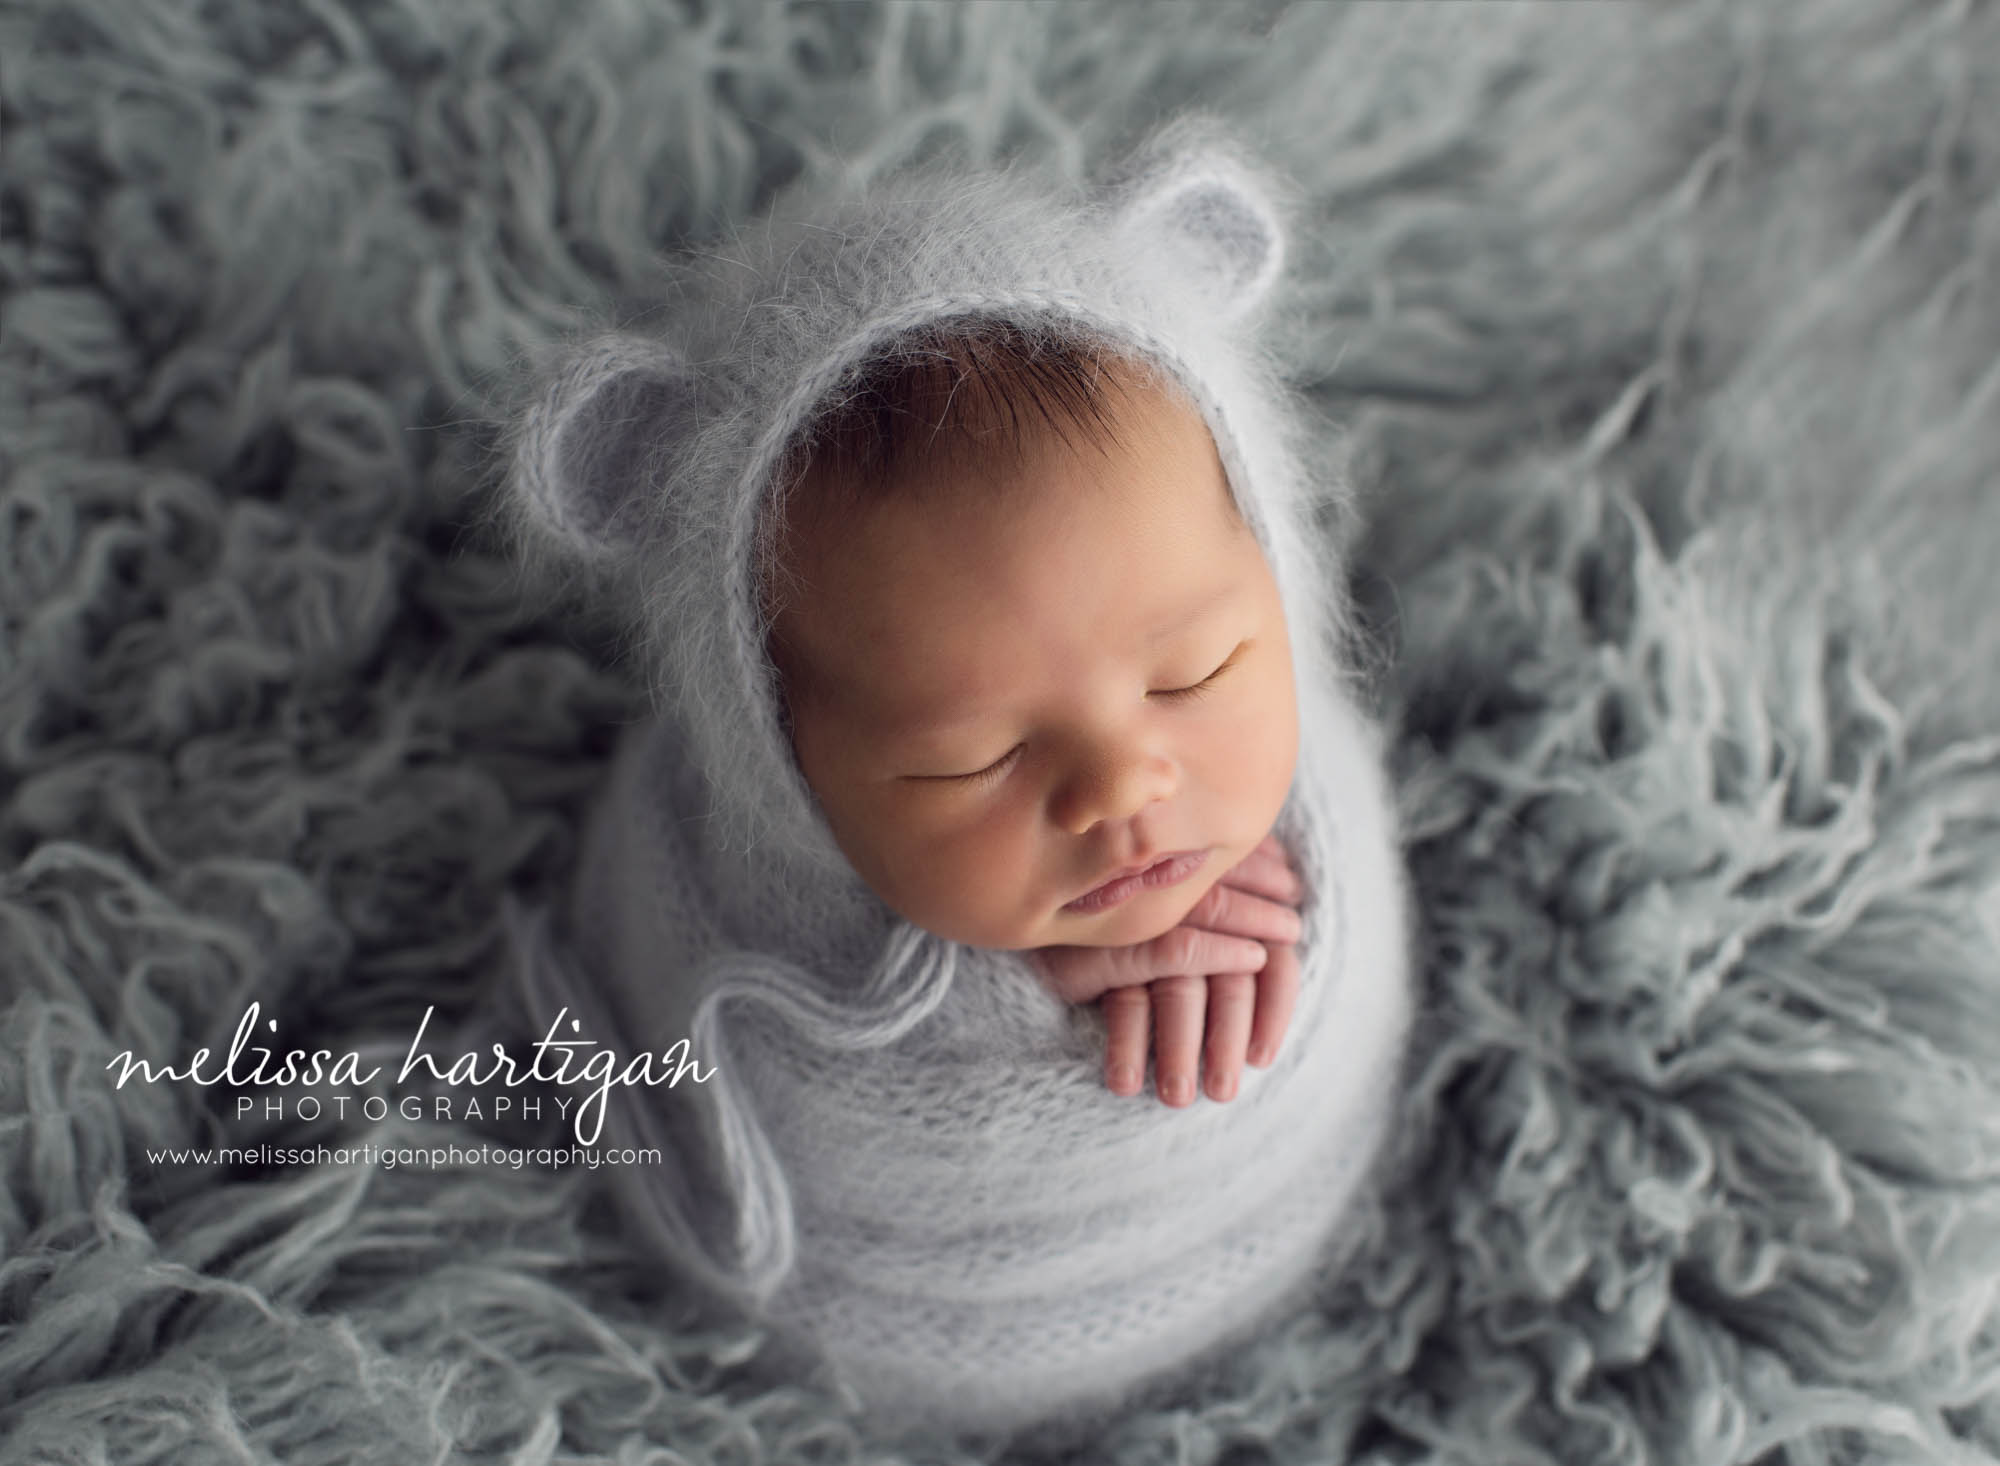 Melissa Hartigan Photography Maternity and Newborn Connecticut Photographer Lucas Newborn Session Baby boy sleeping on light blue knit wrap with hands sticking out wearing hat with ears on blue flokati